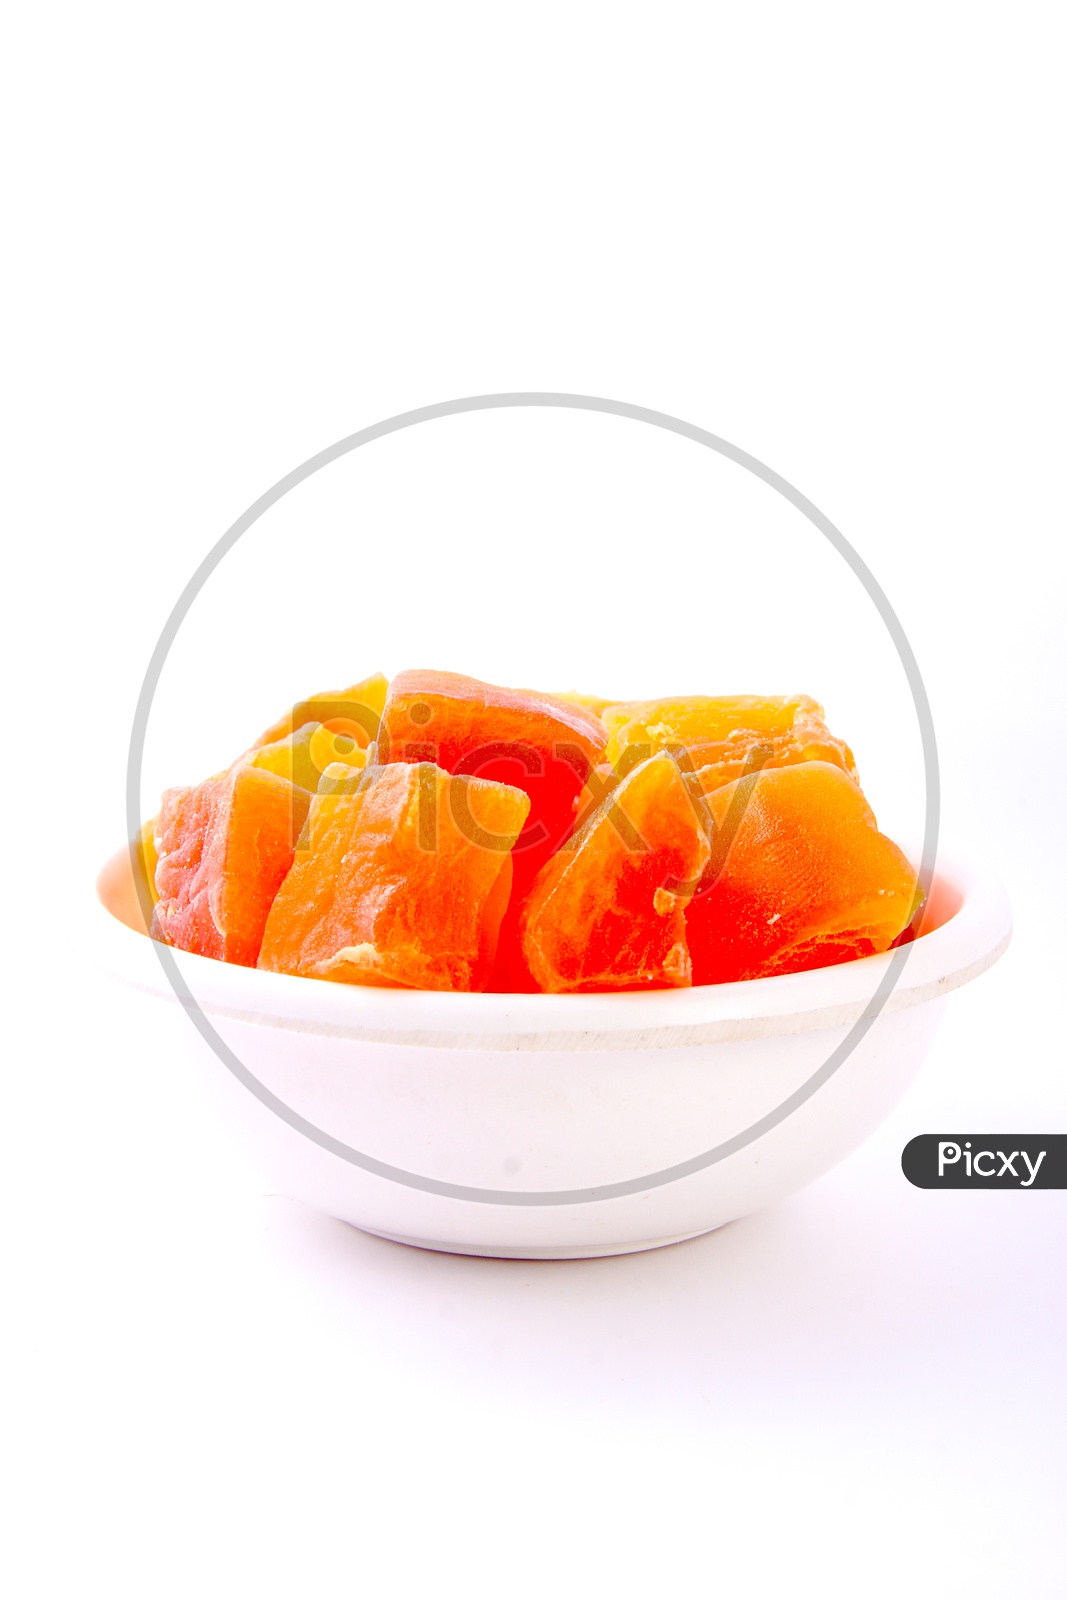 Dry Fruits / Berries in a Bowl On an Isolated White Background